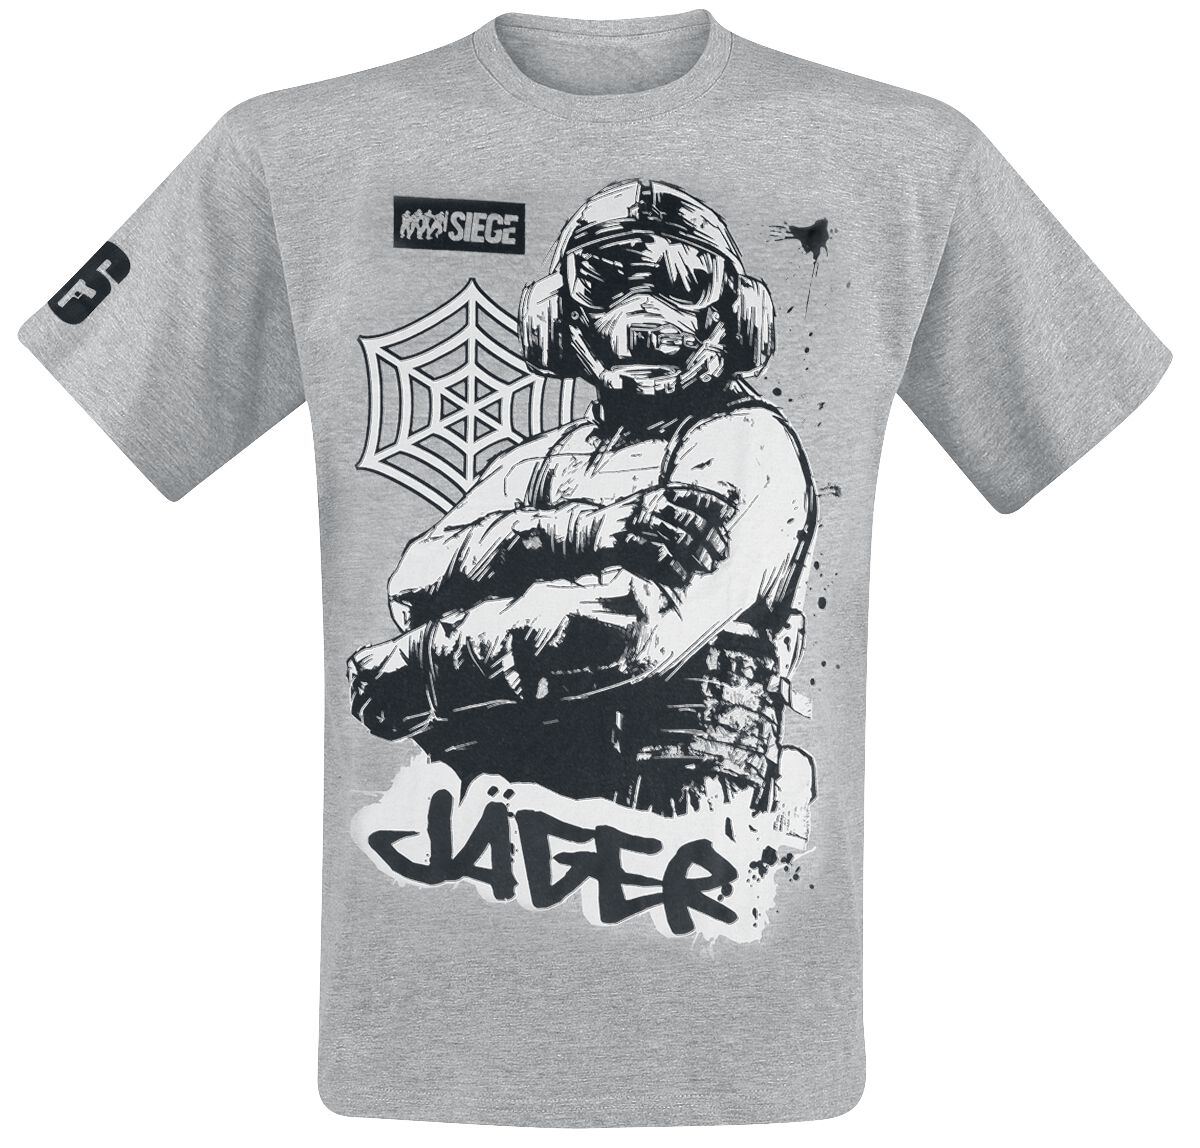 Image of 6 Siege Collection T-Shirt grau meliert